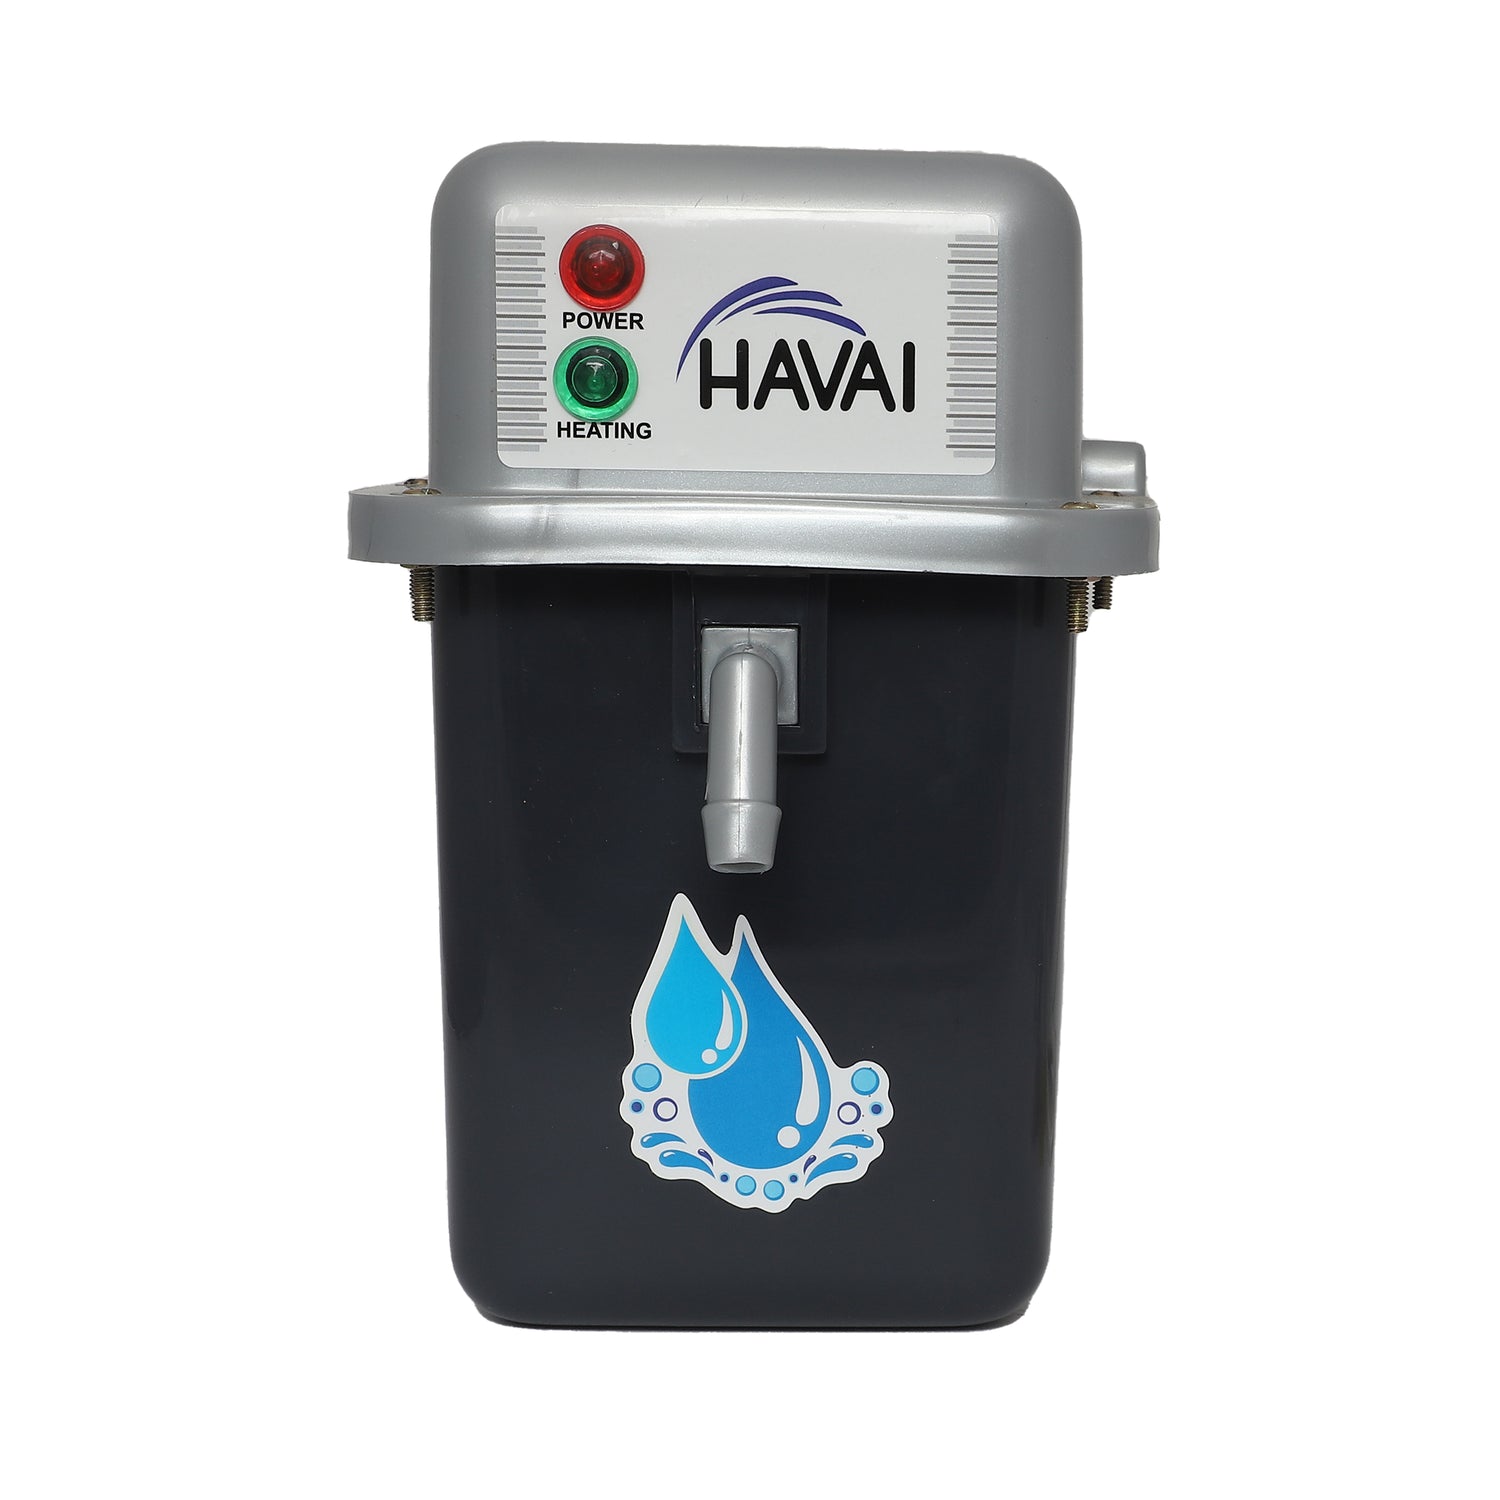 HAVAI Instant Portable Water Heater Geyser 1Litre for Use Kitchen